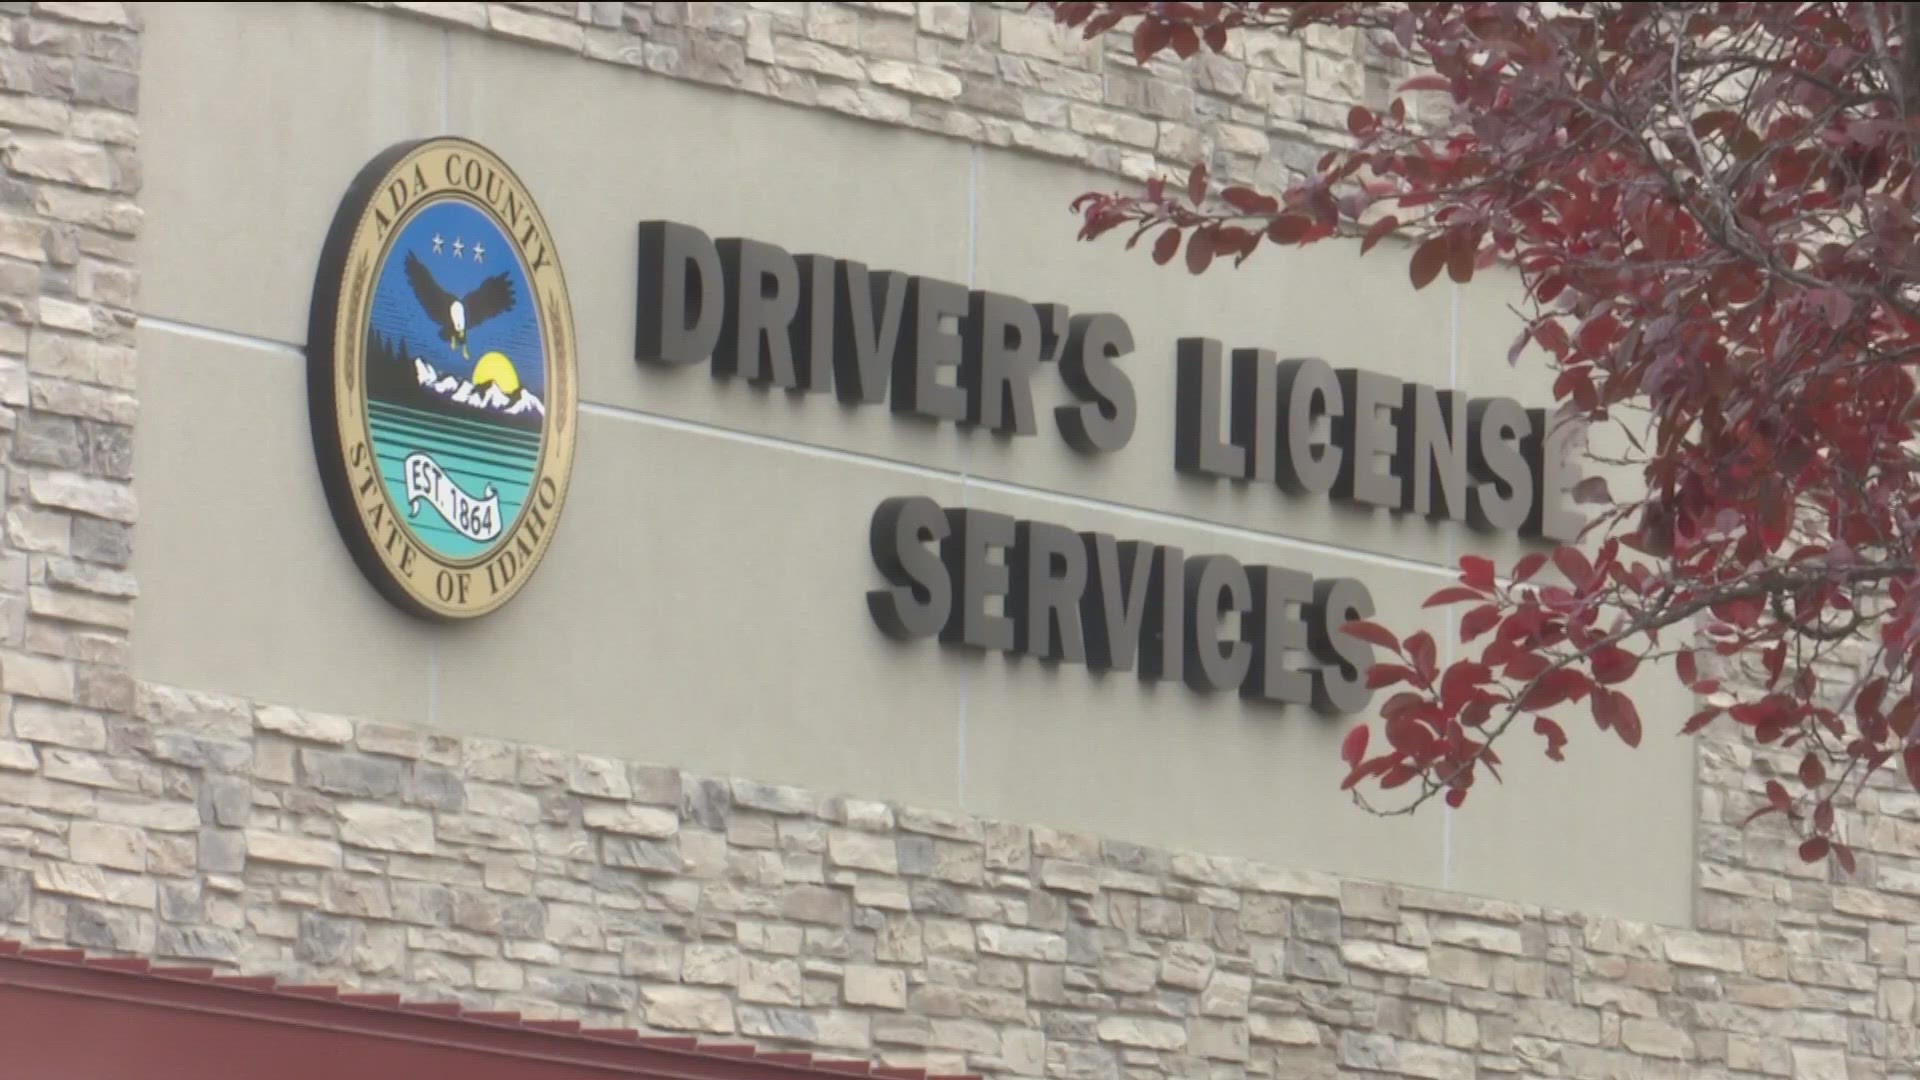 Proposed legislation aimed to allow undocumented Idahoans to obtain a restricted driver's license in the Gem State, regardless of immigration status.